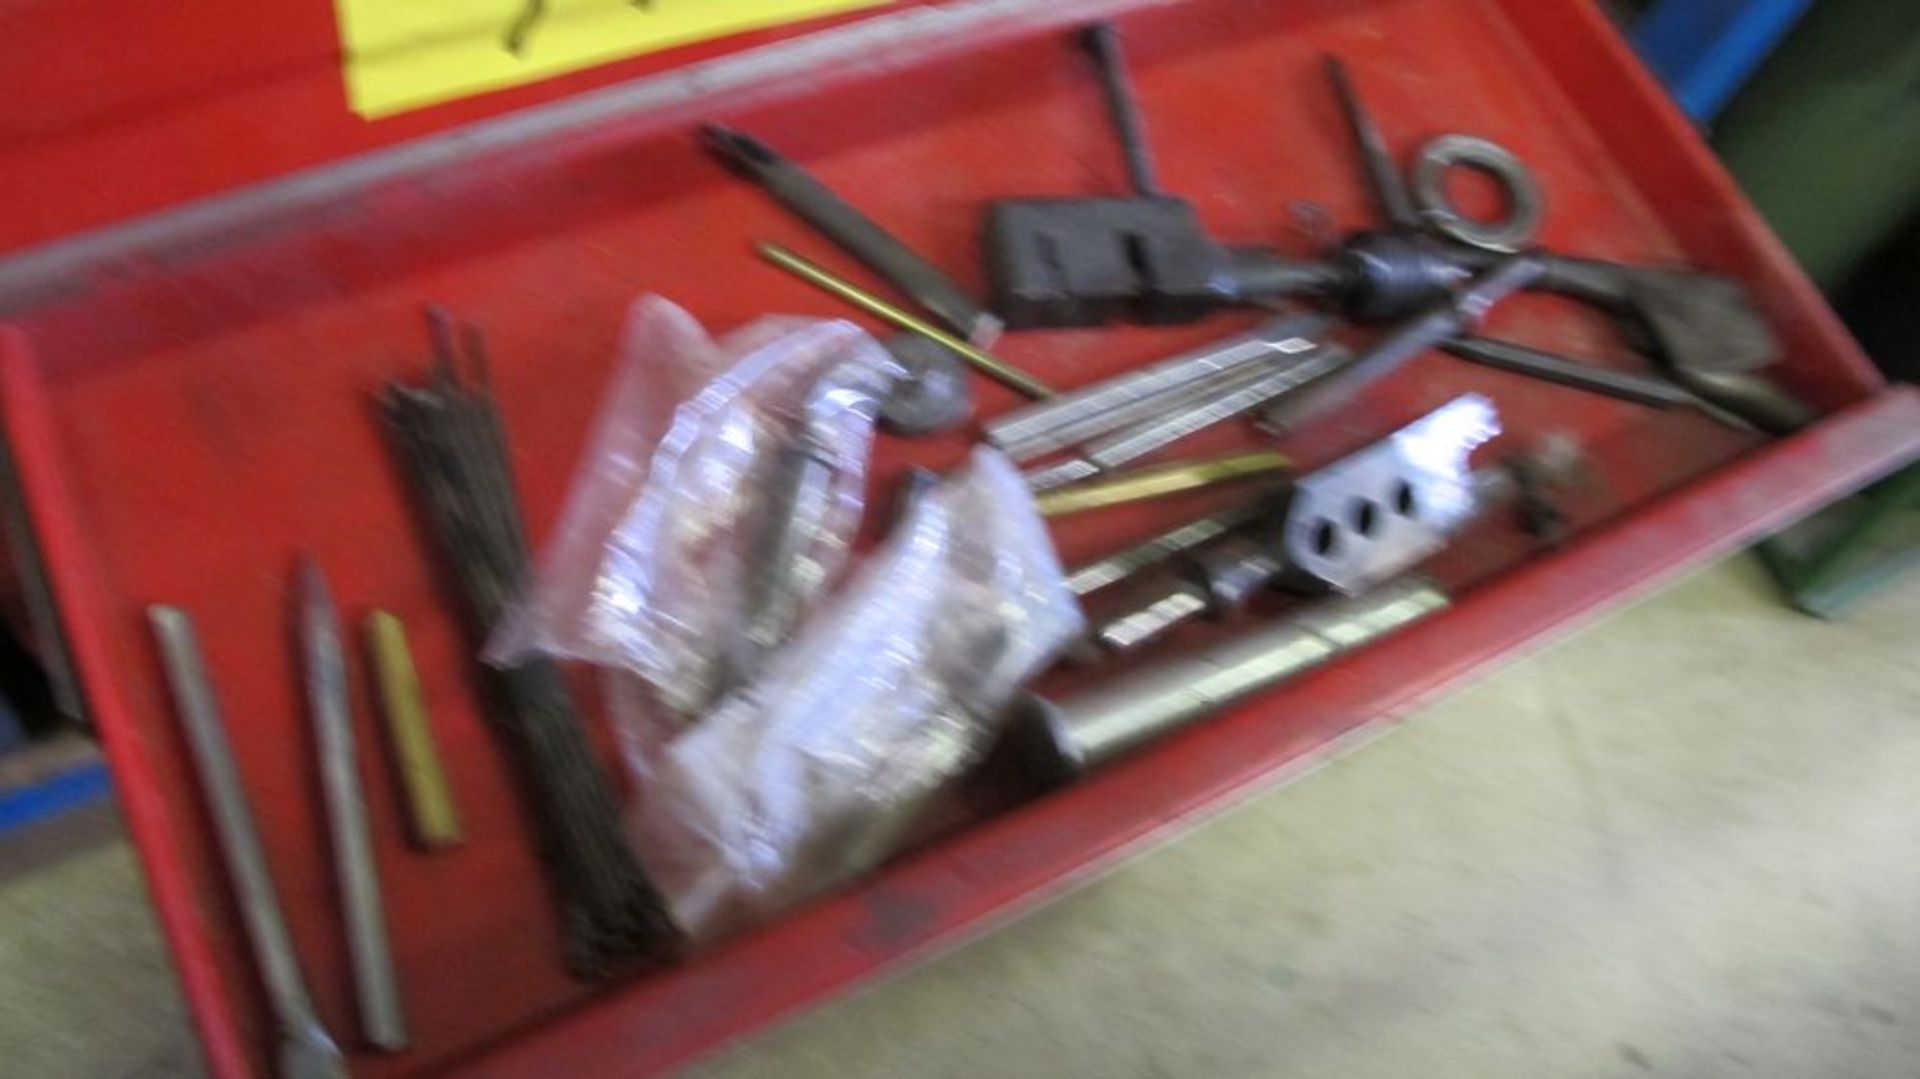 HUSKY TOOLBOX W/ CONTENTS AND AUTOMOTOIVE REFILL KIT - Image 3 of 5